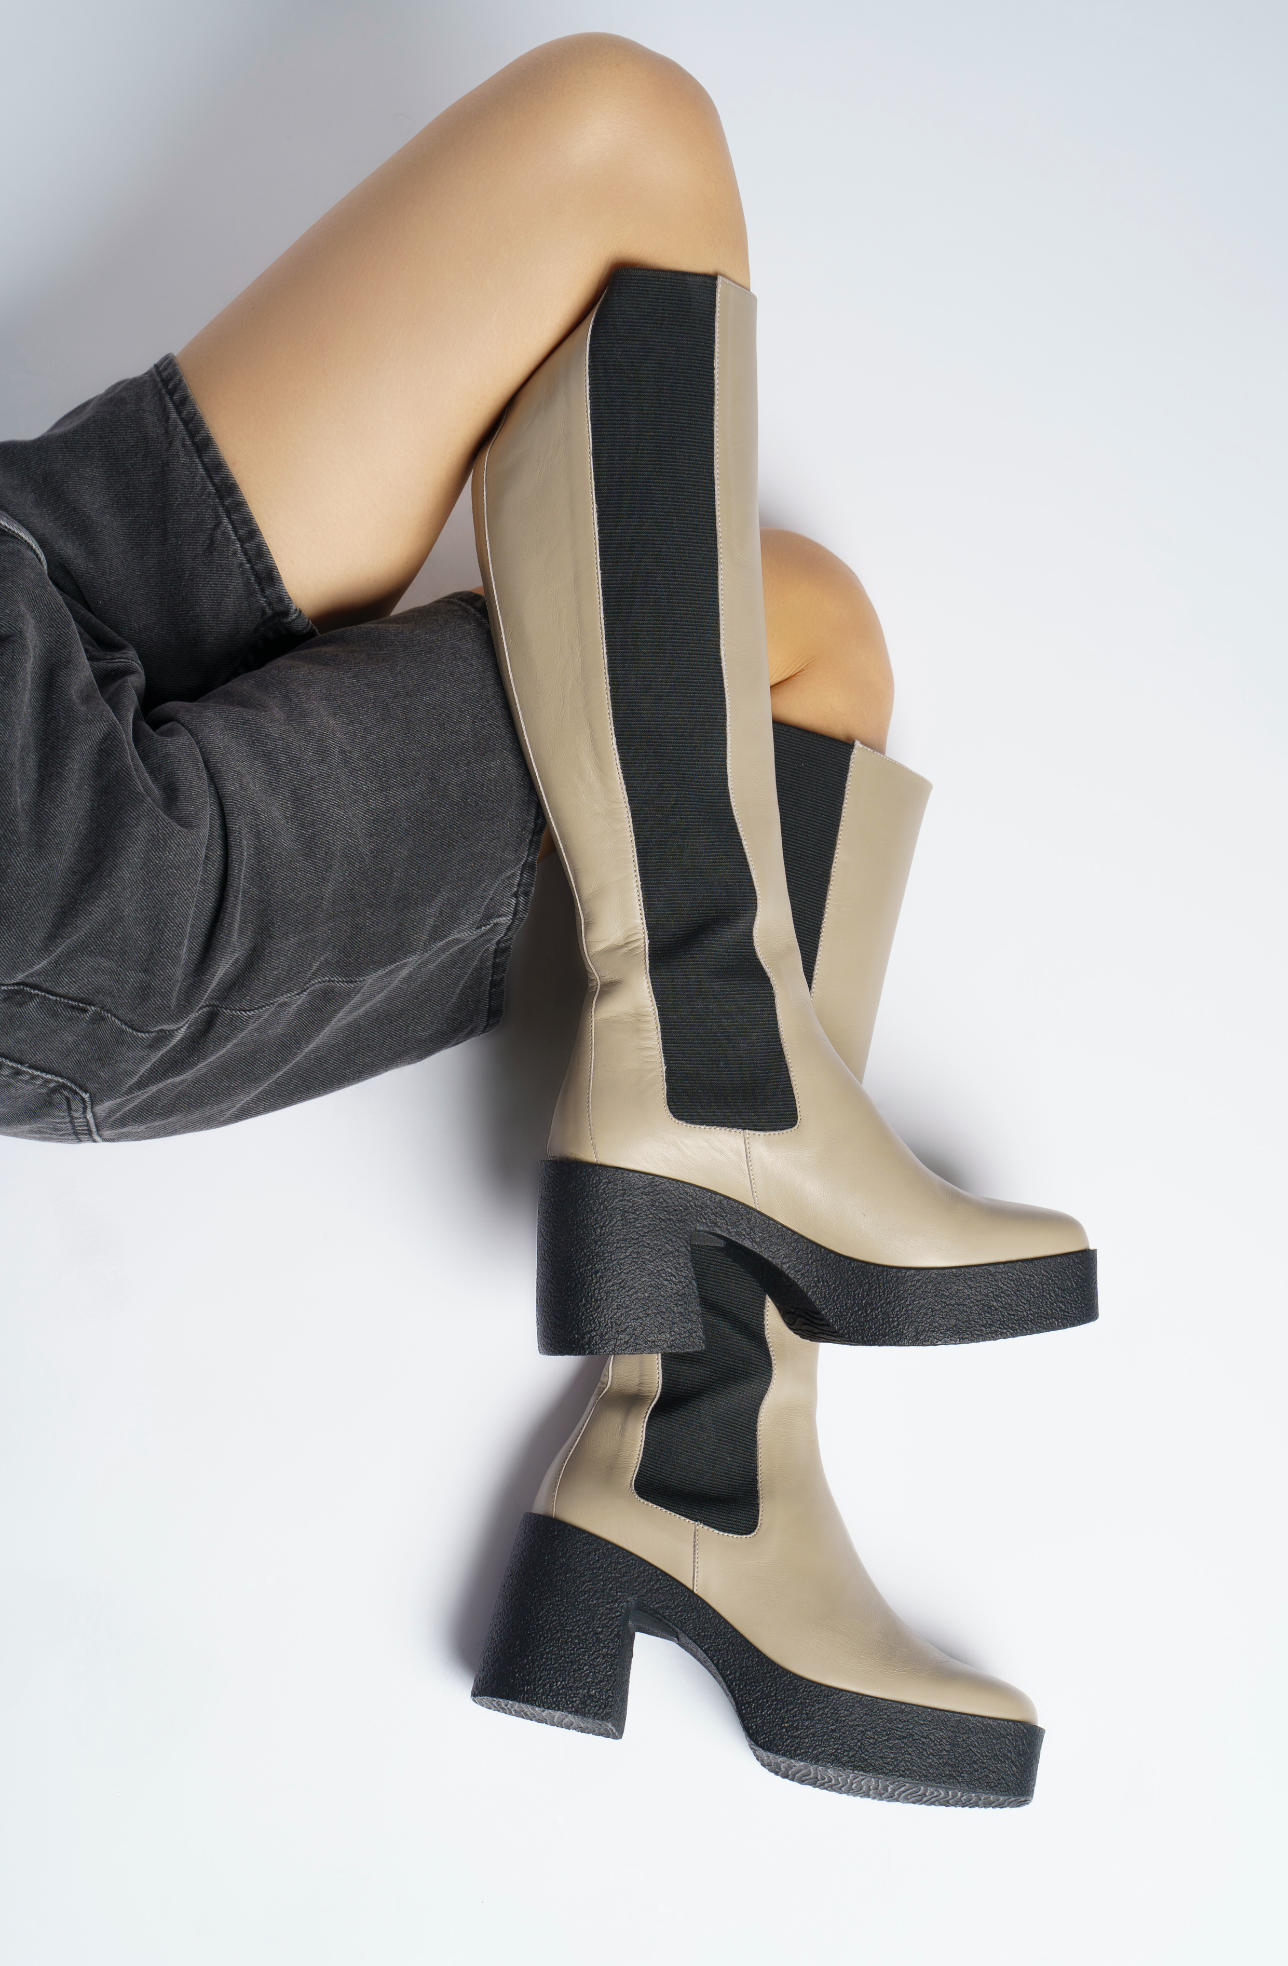 Momoko Taupe Knee-High Leather Chelsea Boots 20077-05-02 -6